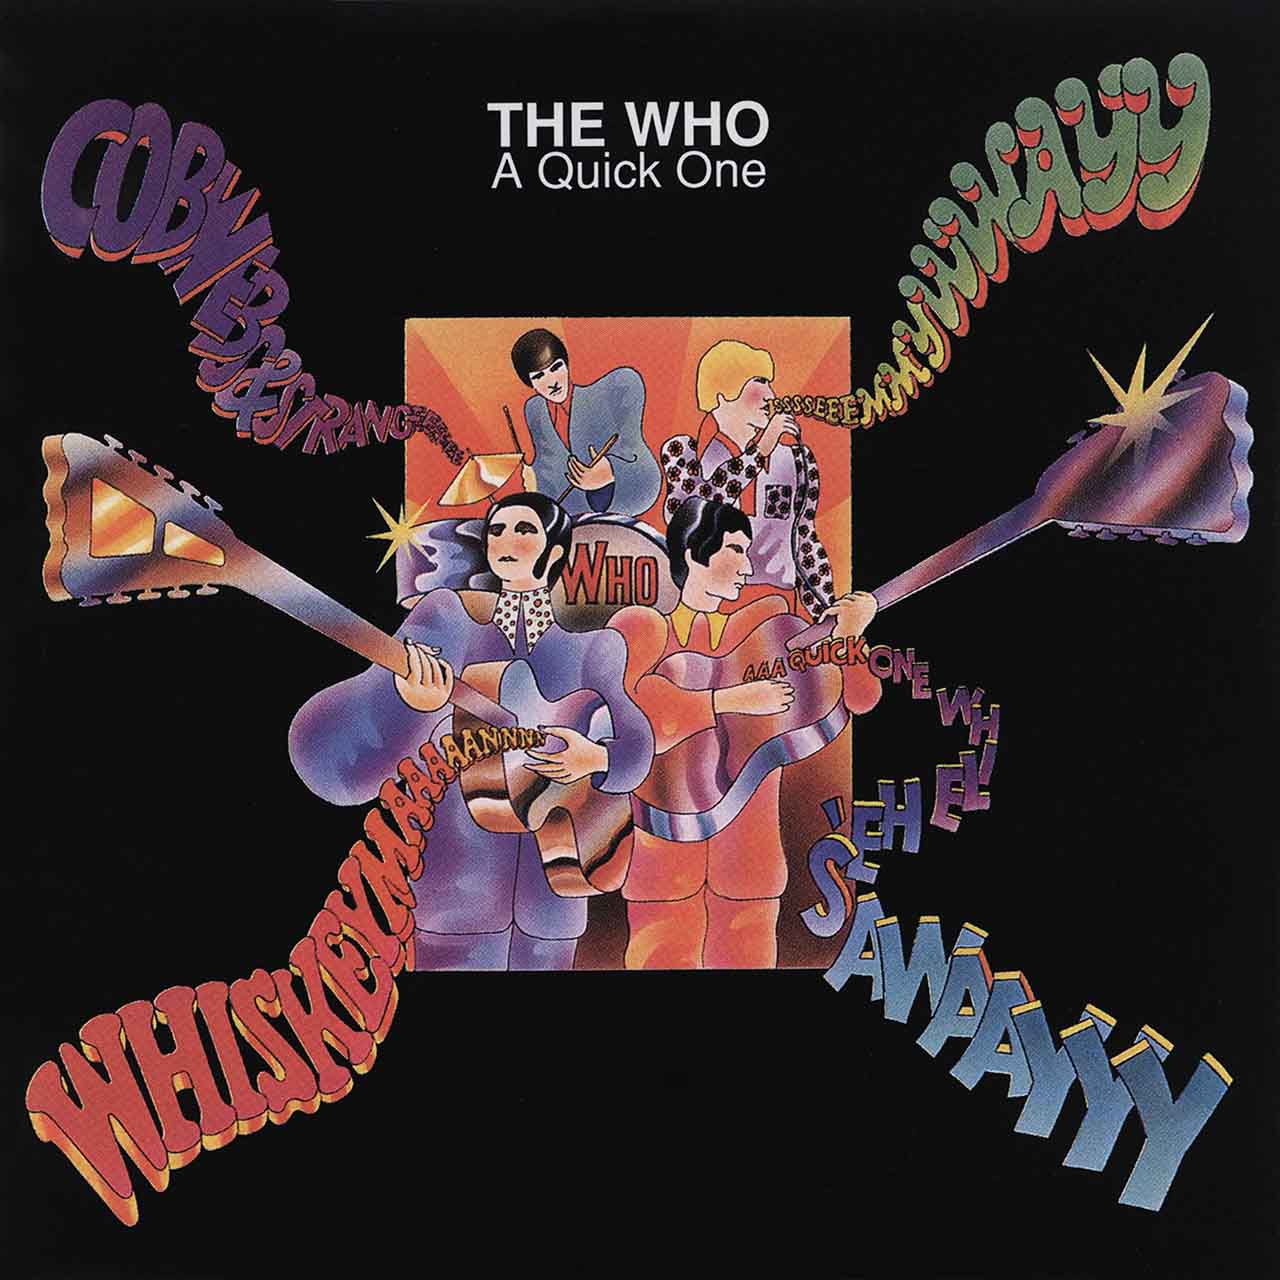 ‘A Quick One’: How The Who Took a Giant Step Forward